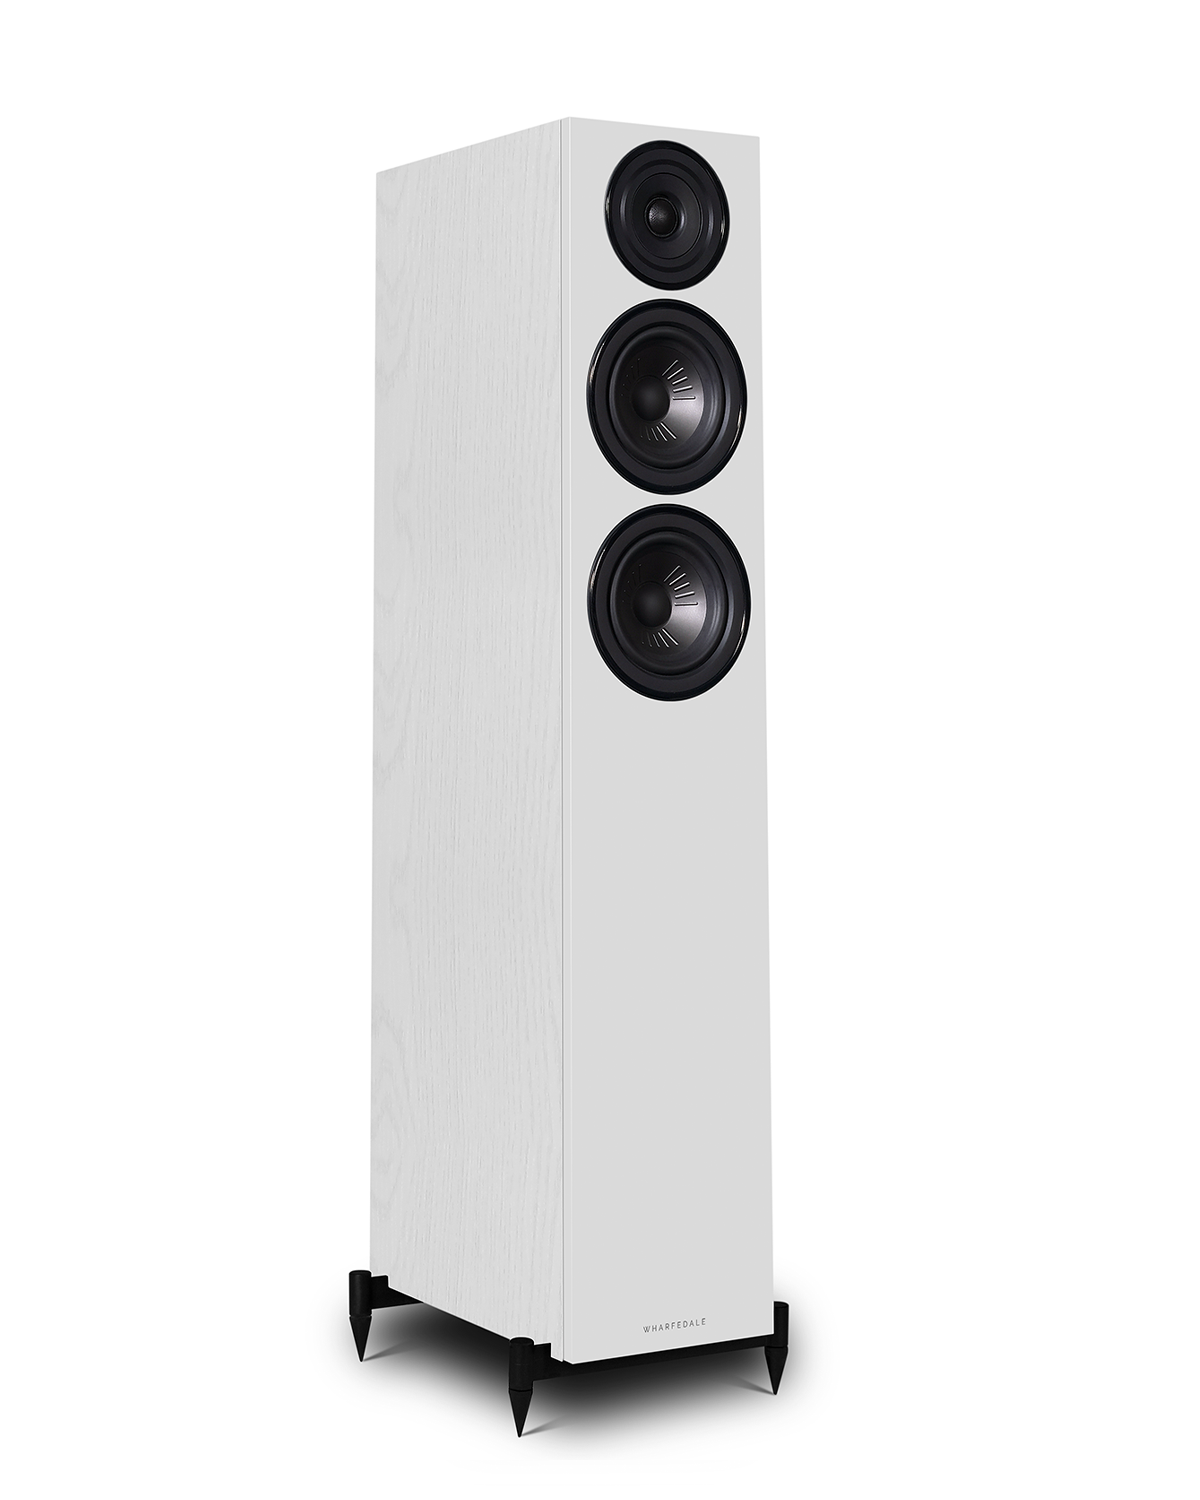 The more compact of the Wharfedale DIAMOND 12 series floorstanding options, the DIAMOND 12.3 loses none of the accuracy and musicality of the standmount (bookshelf) options. With enhanced presence and power, the DIAMOND 12.3 is refined and the perfect, affordable floorstanding speaker for 2-channel hi-fi systems